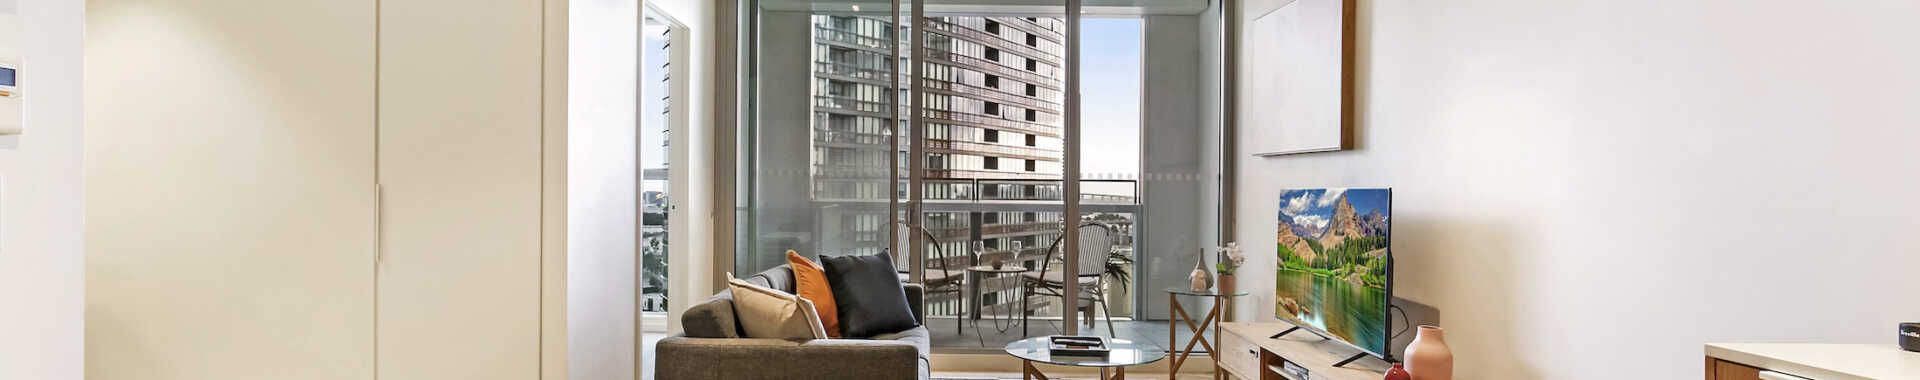 Astra Apartments Docklands apartment accommodation